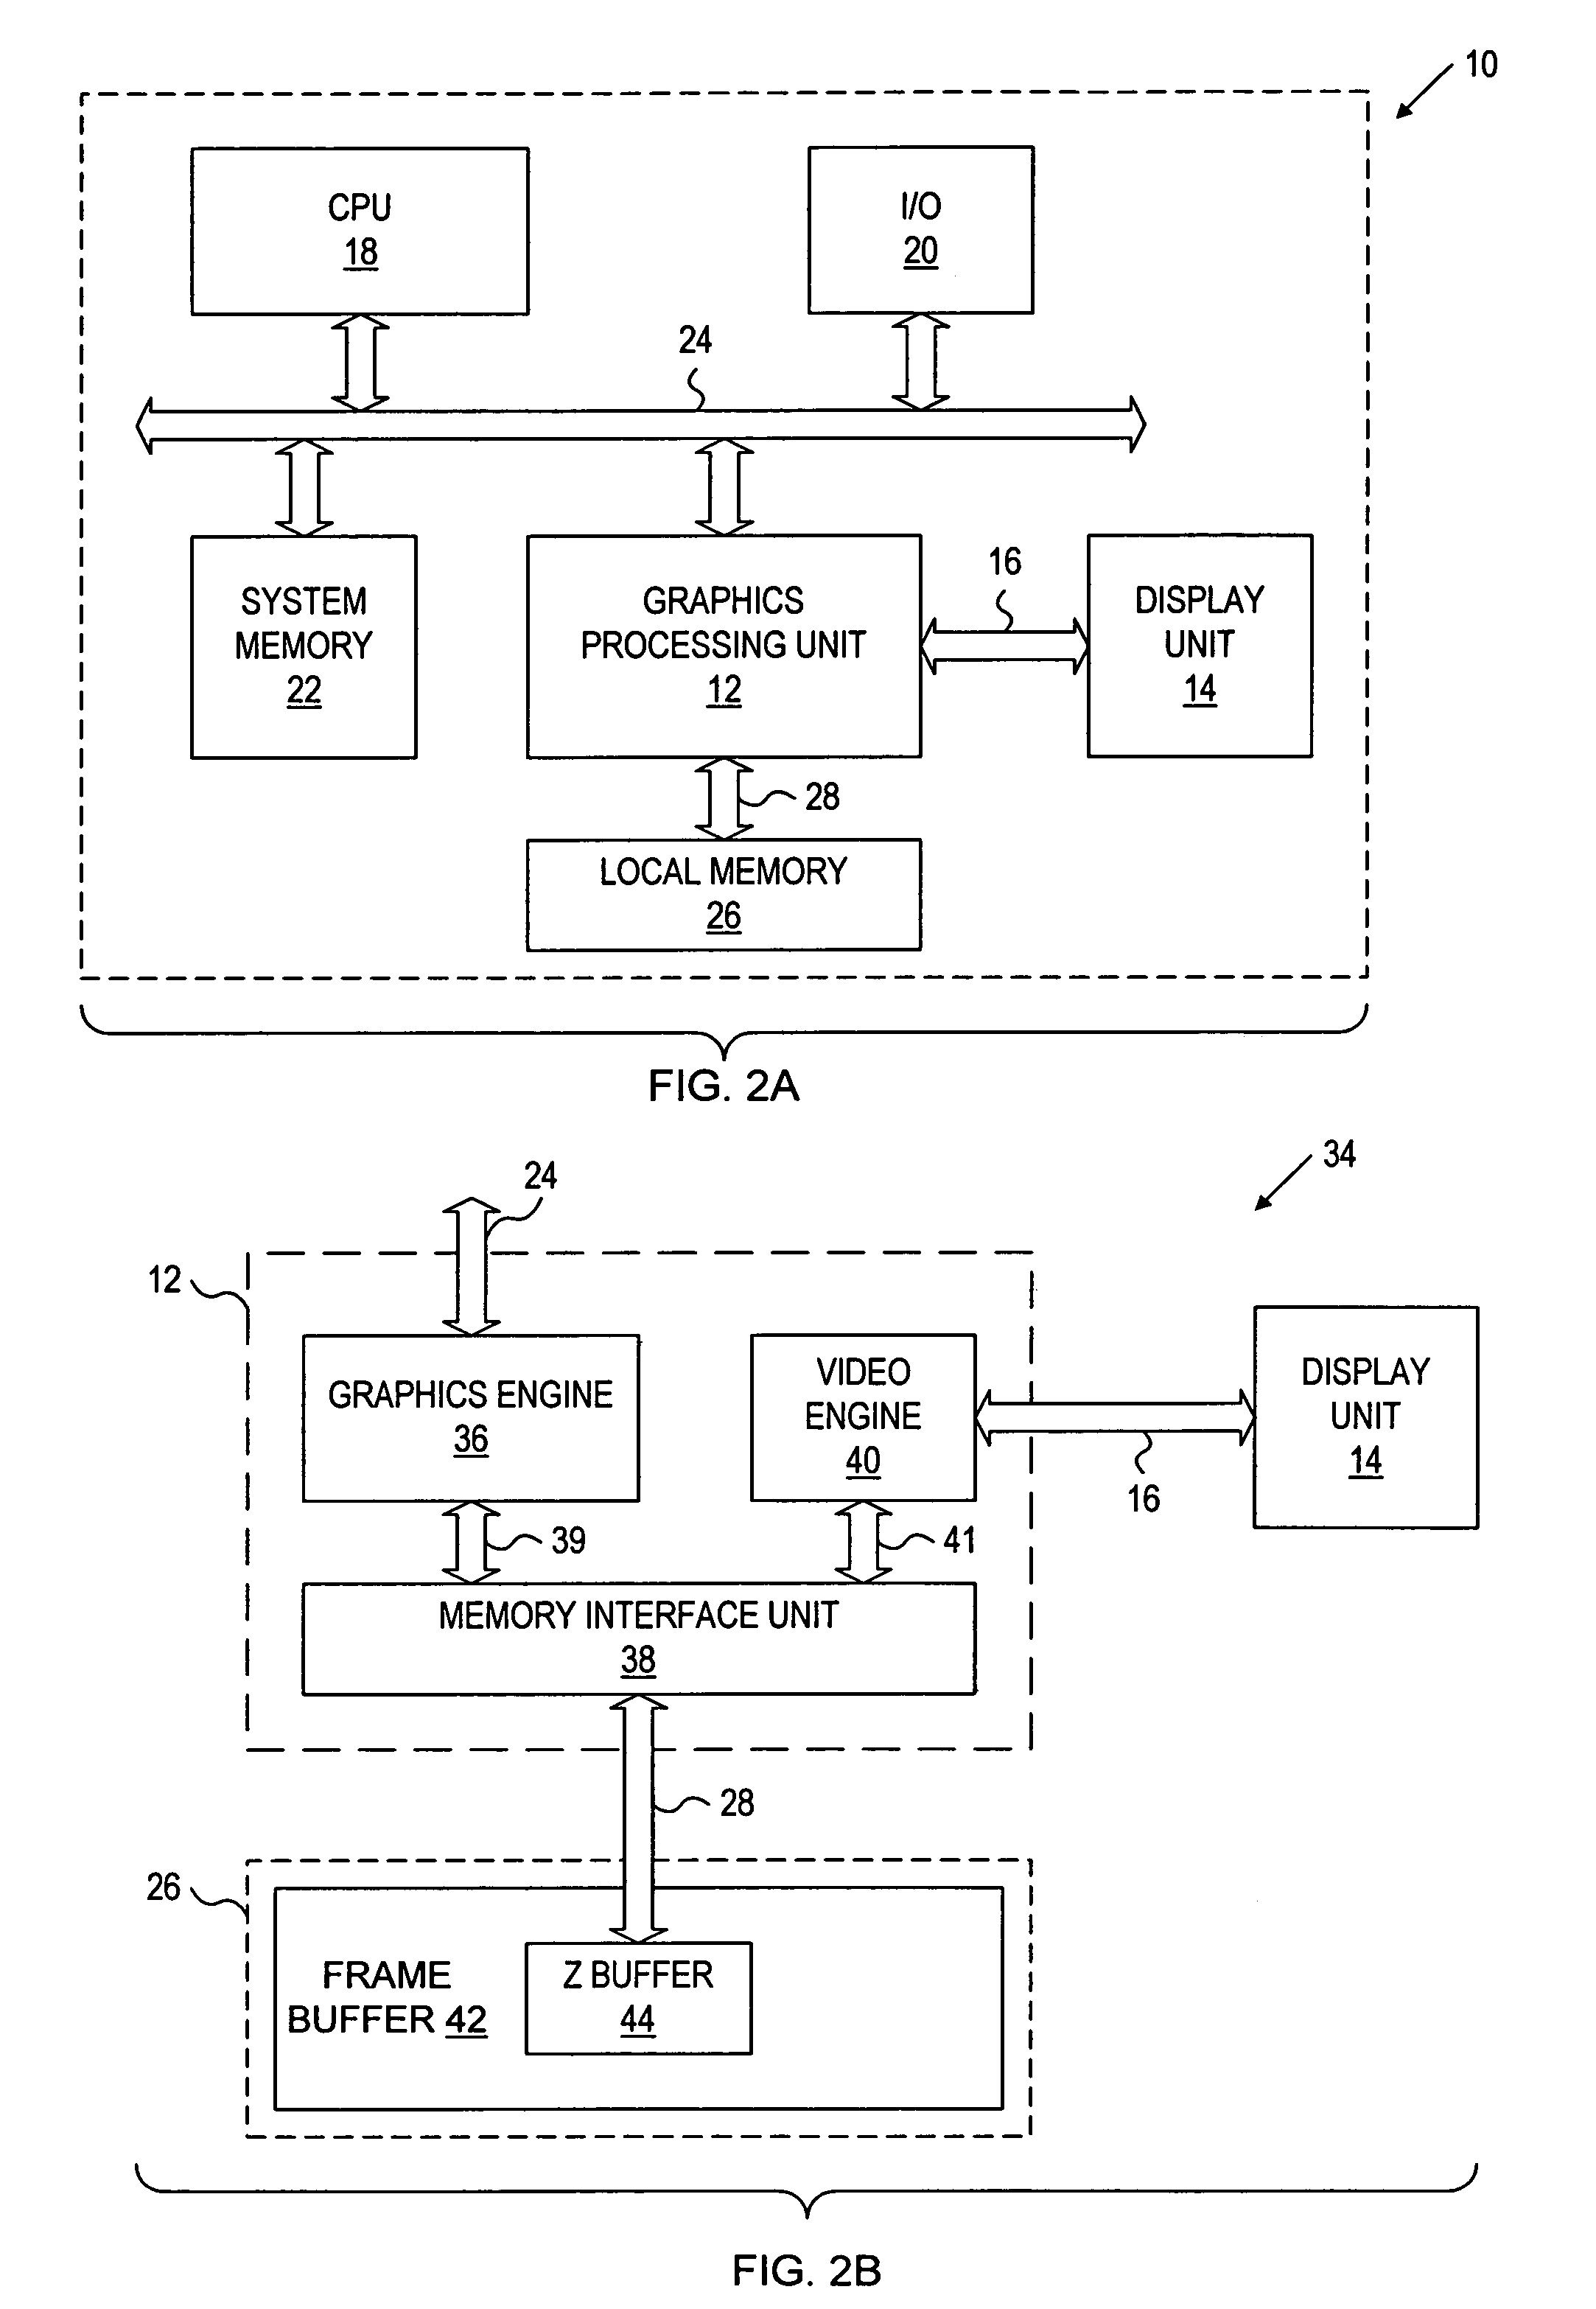 Method and apparatus for managing and accessing depth data in a computer graphics system